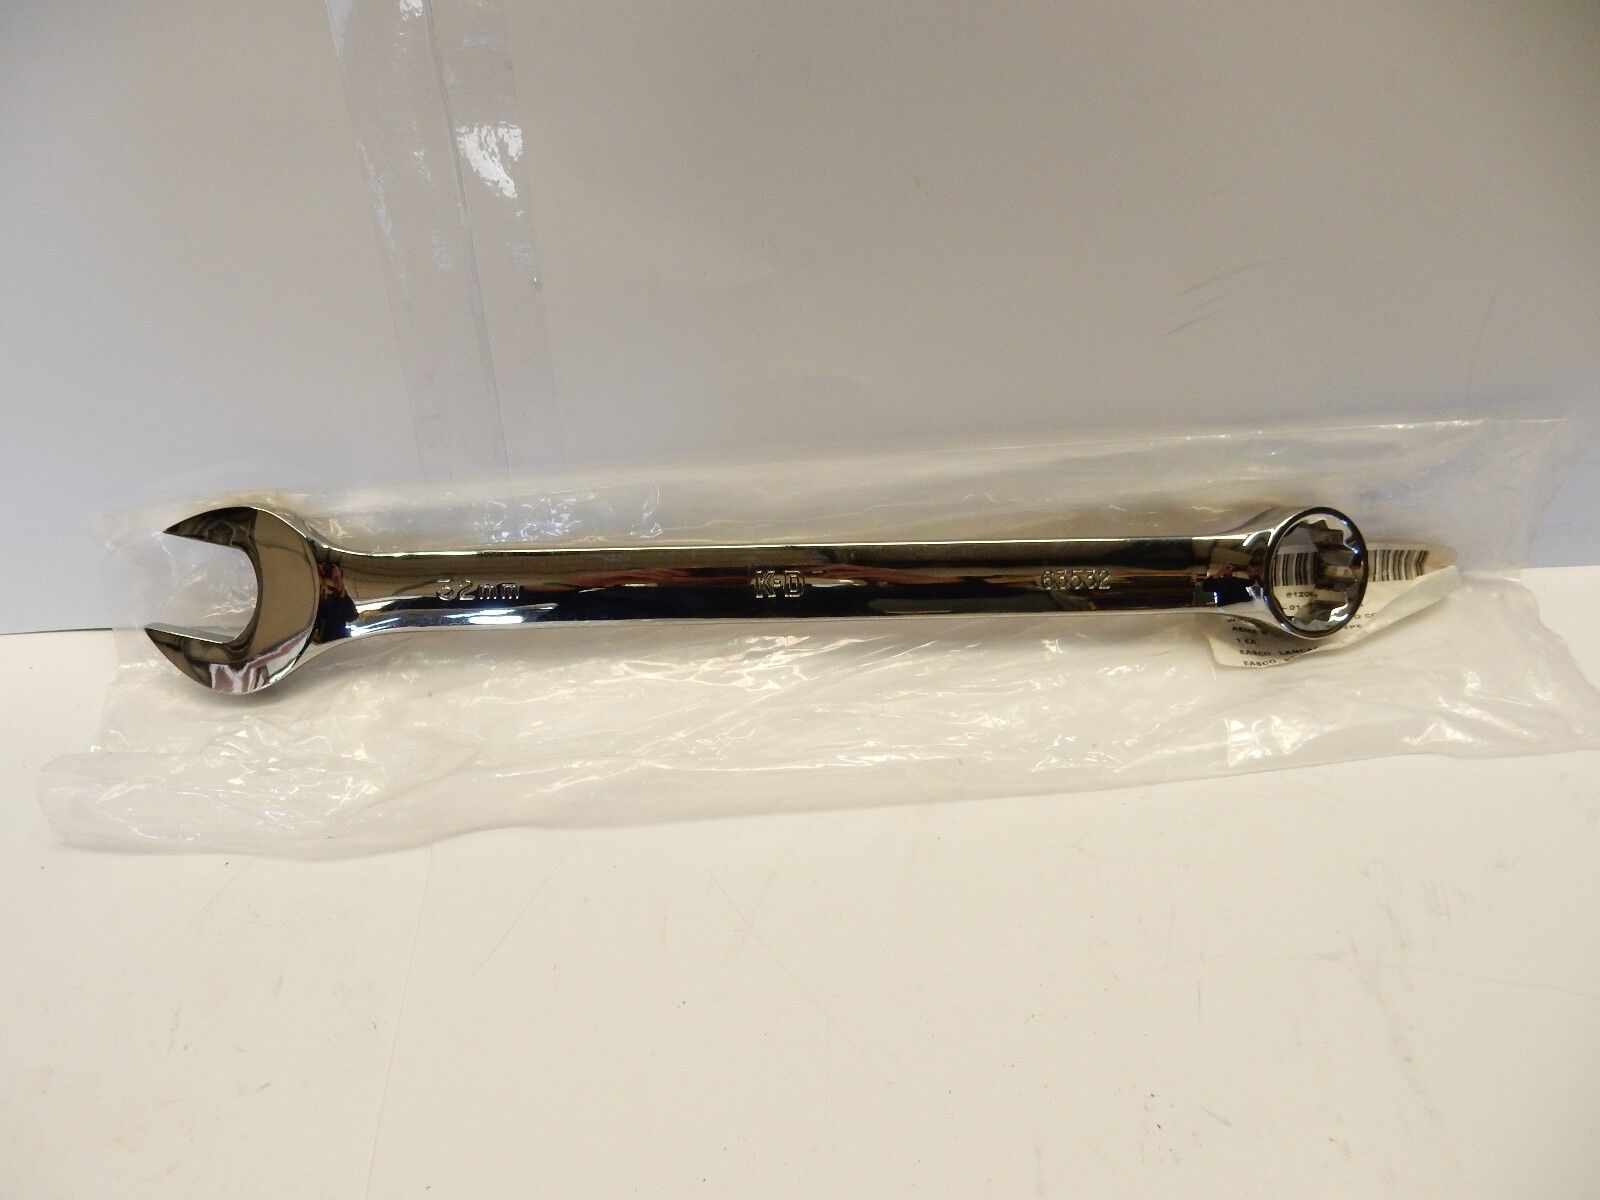 KD TOOLS 32MM WRENCH 63532 OPENED 12 COMBINATION Superior [Alternative dealer] END PT CLOSED